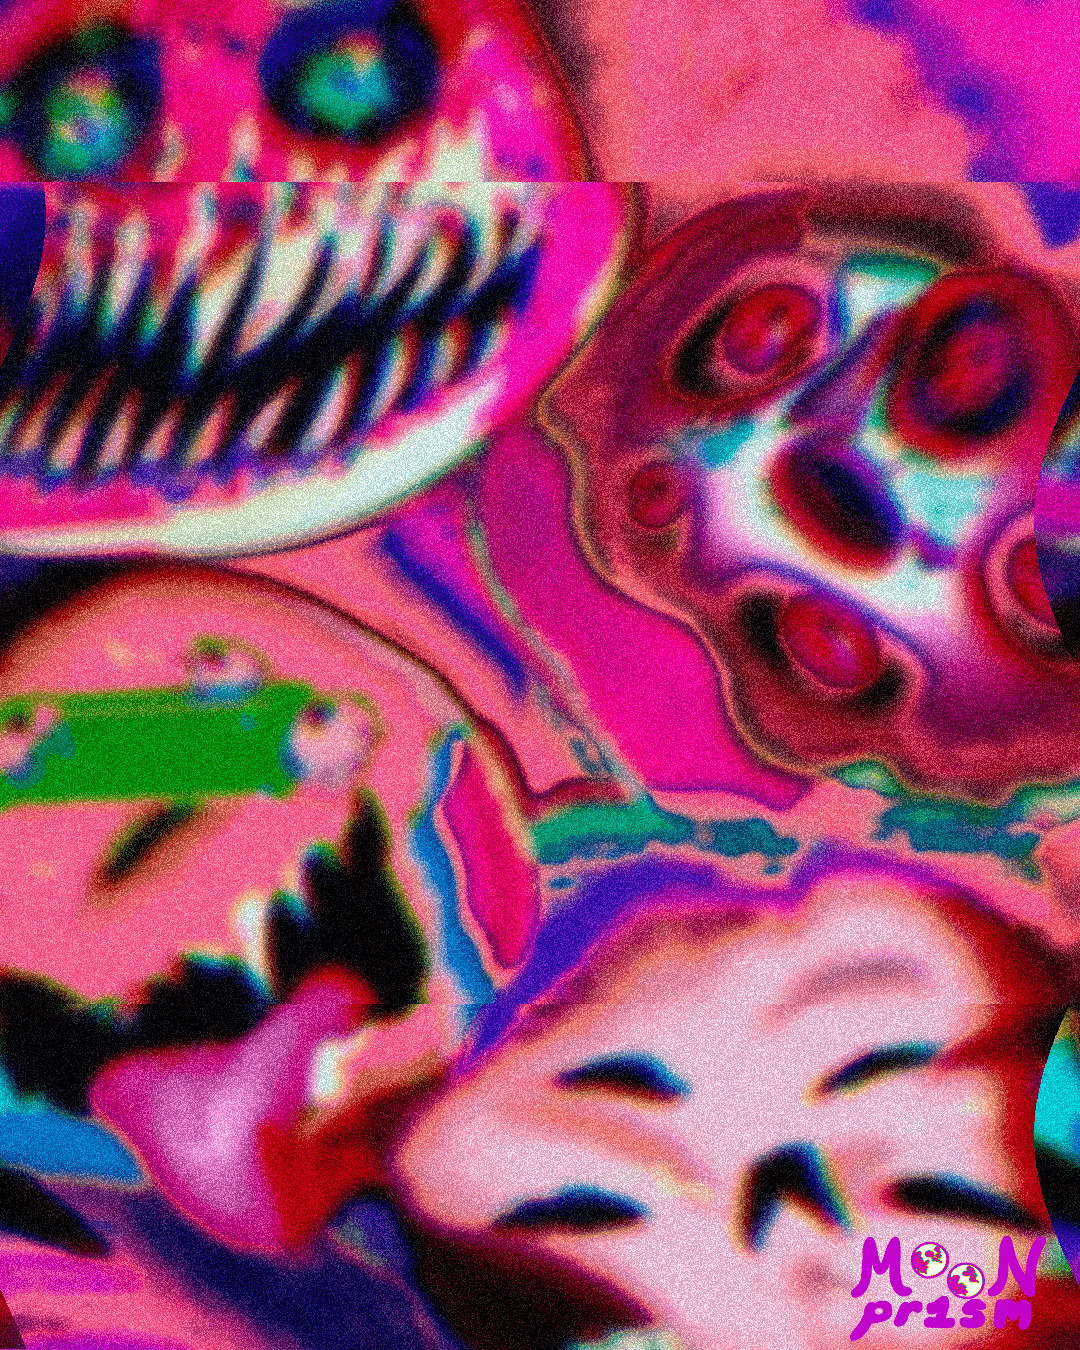 An illustration of monster donuts, glitching and distorted.